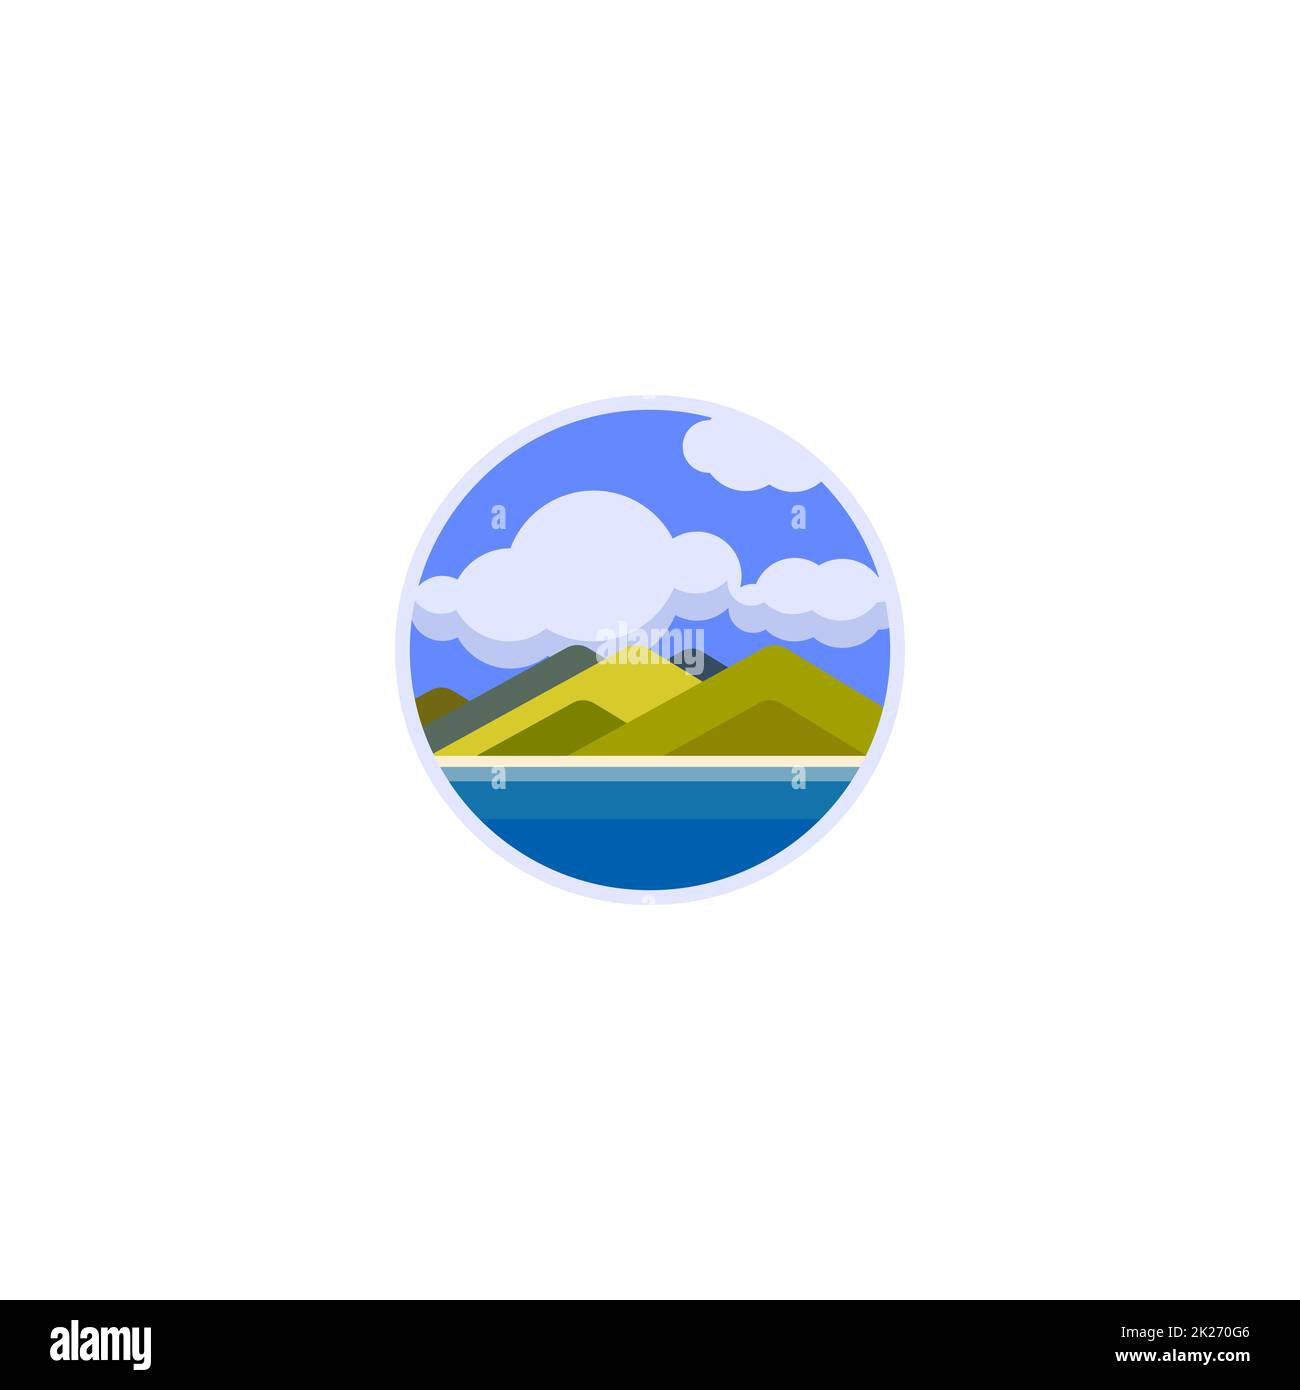 Nature landscape round logo concept. High green hills on river shore on blue sky with clouds background. Isolation flat vector illustration Stock Photo